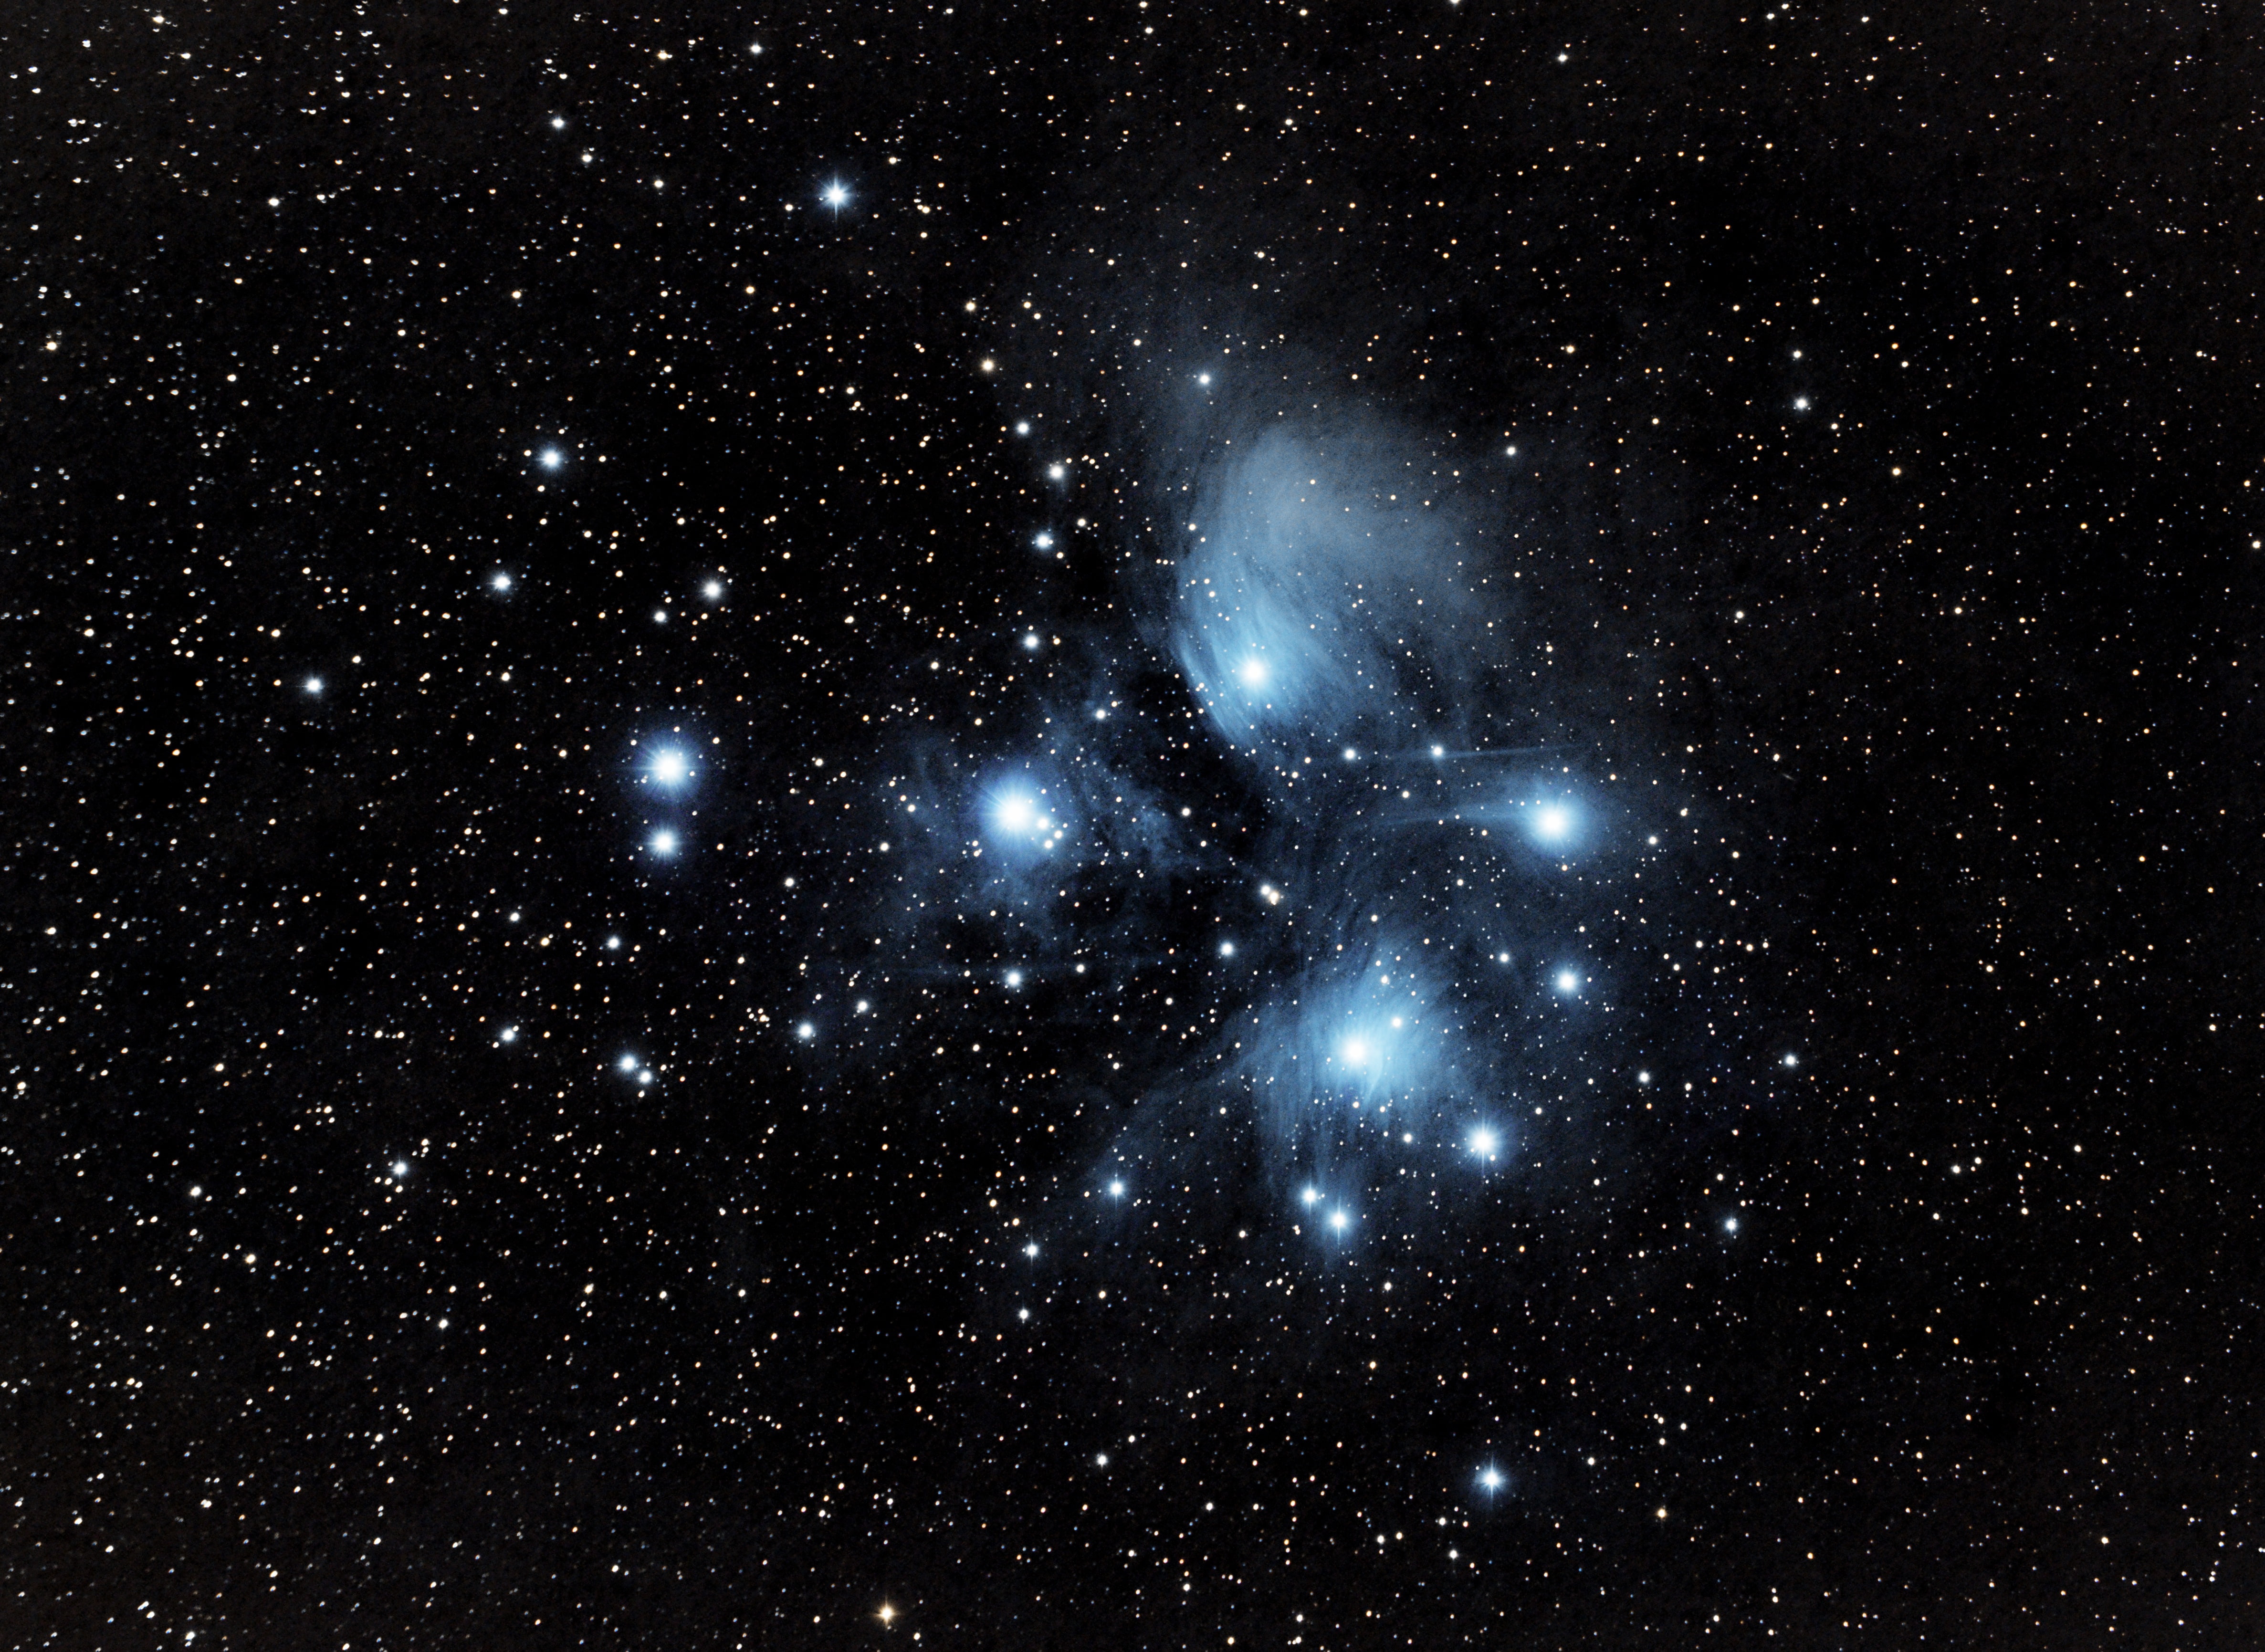 galaxy painting, The Pleiades, M45, star cluster, in the constellation of Taurus